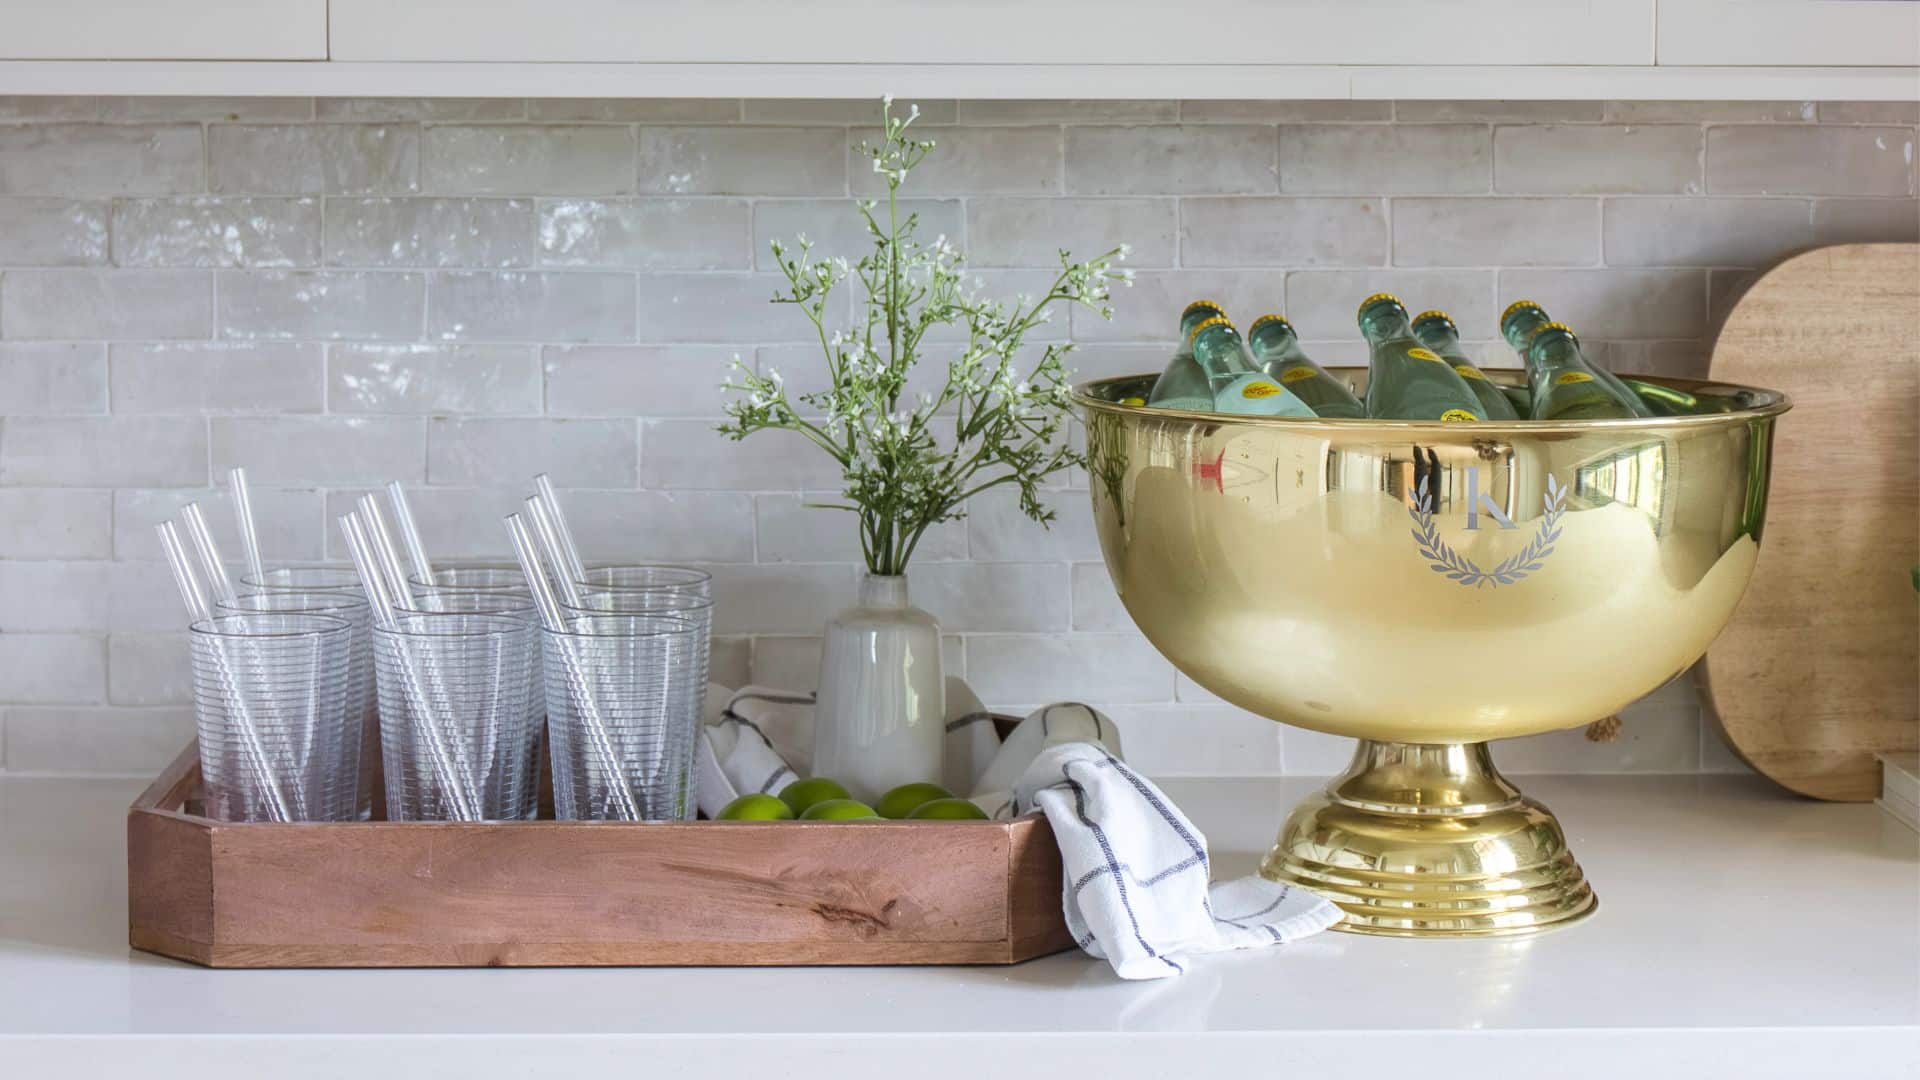 Best ice buckets for your home bar